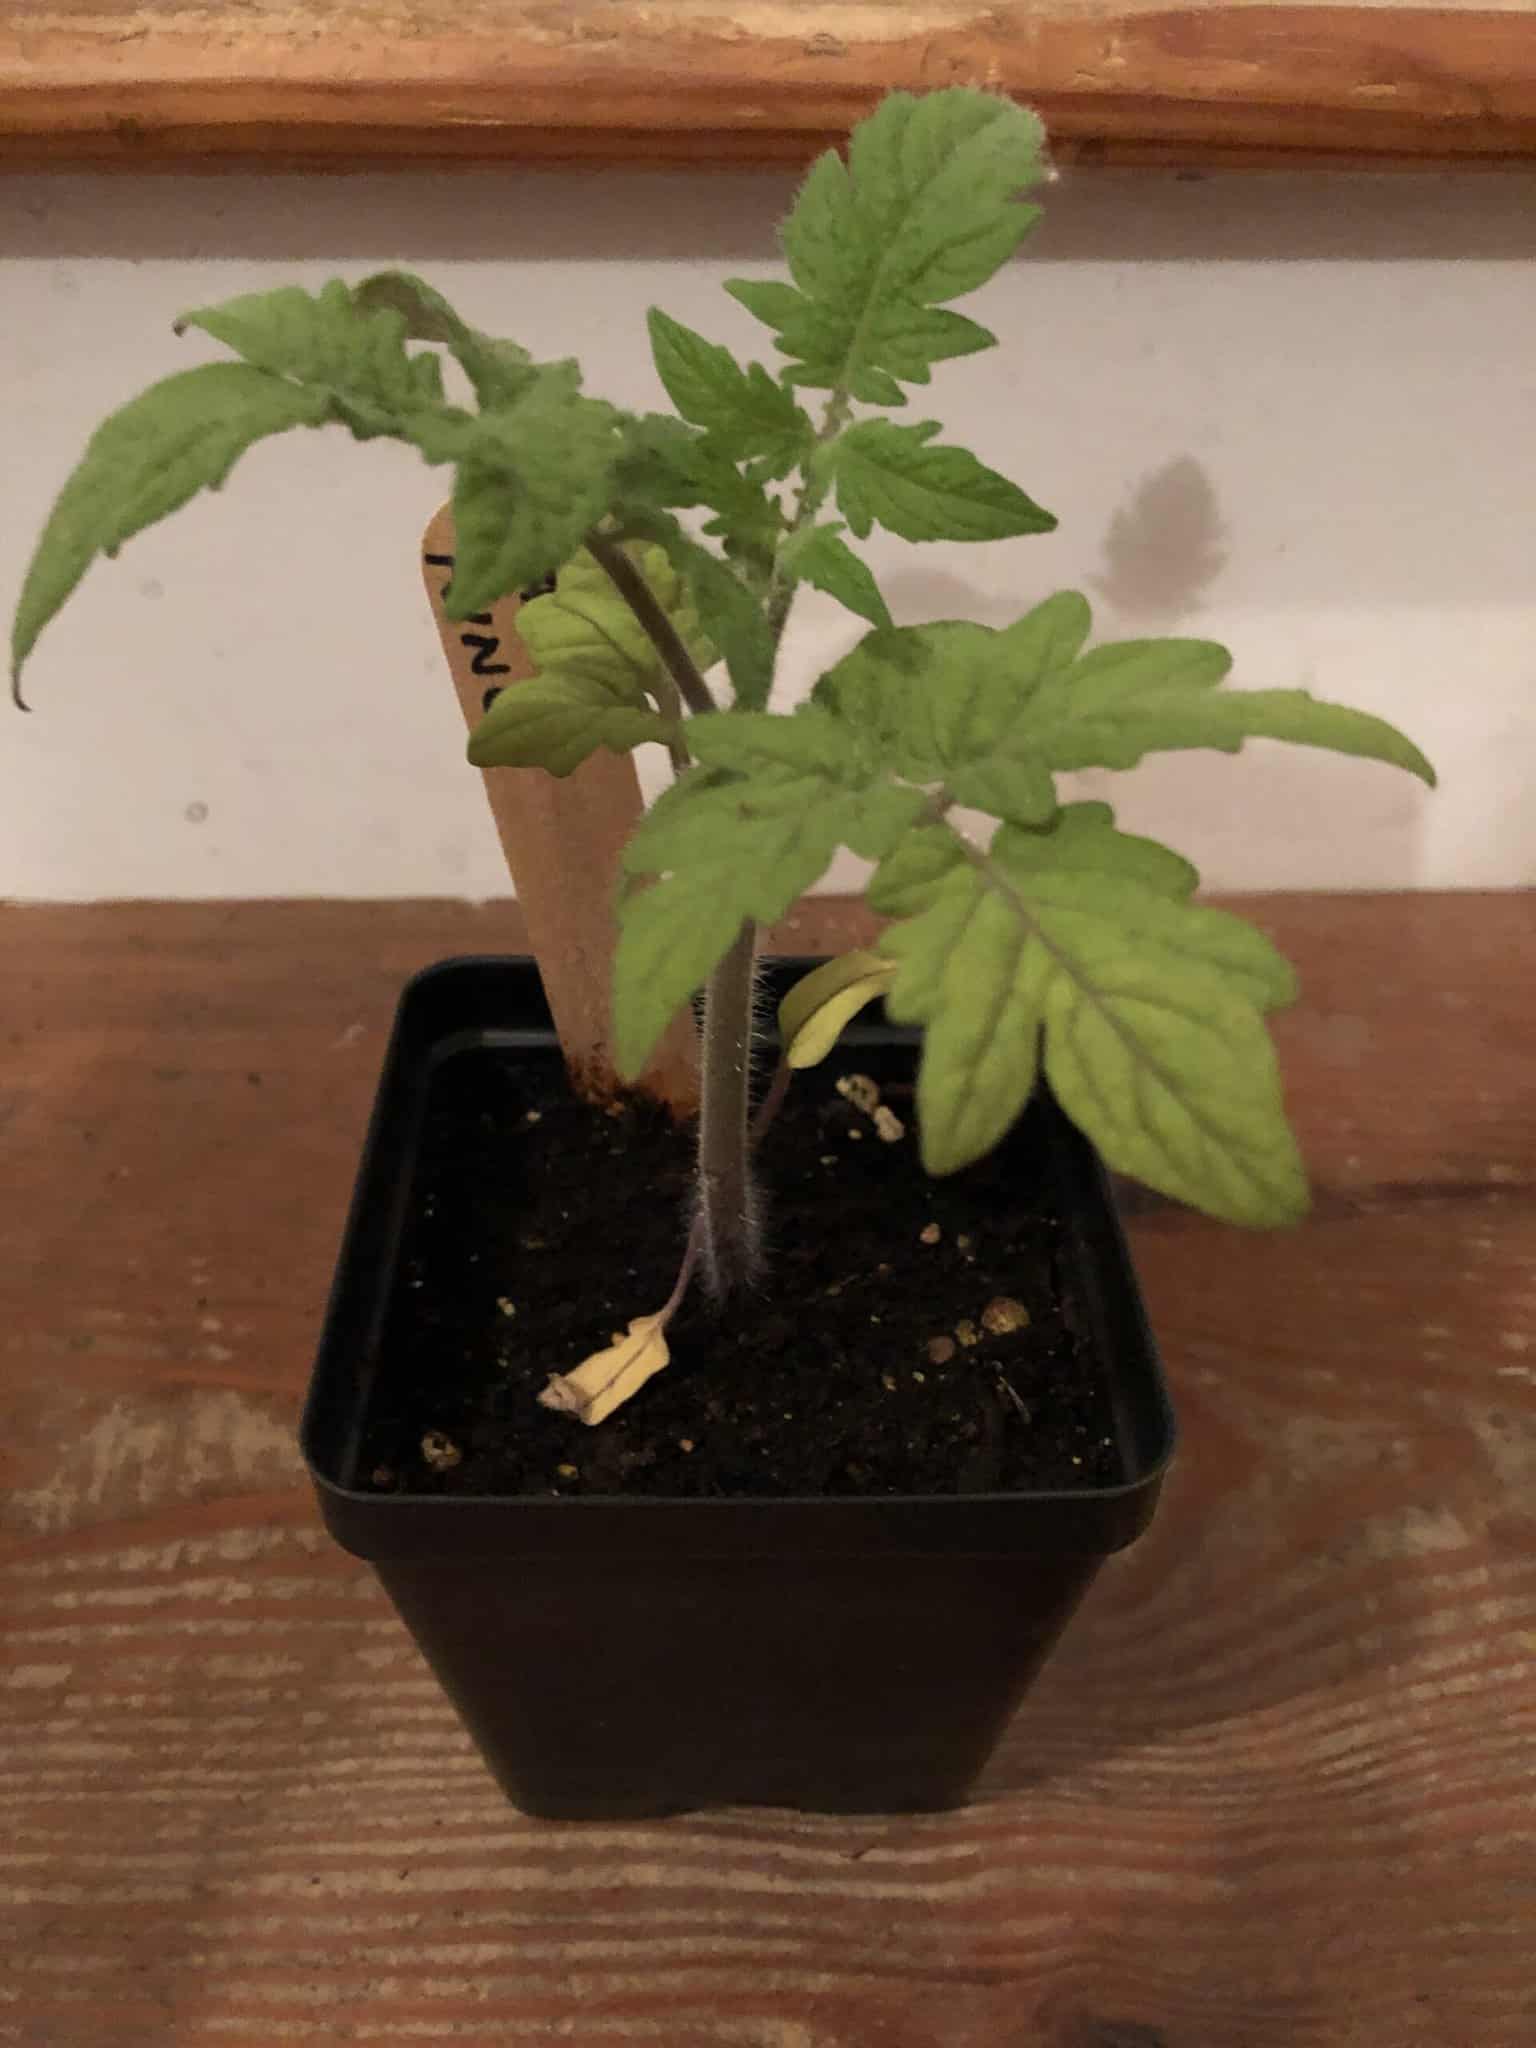 Adventures with Transplanting - Tips for introducing your seedlings to their new home!